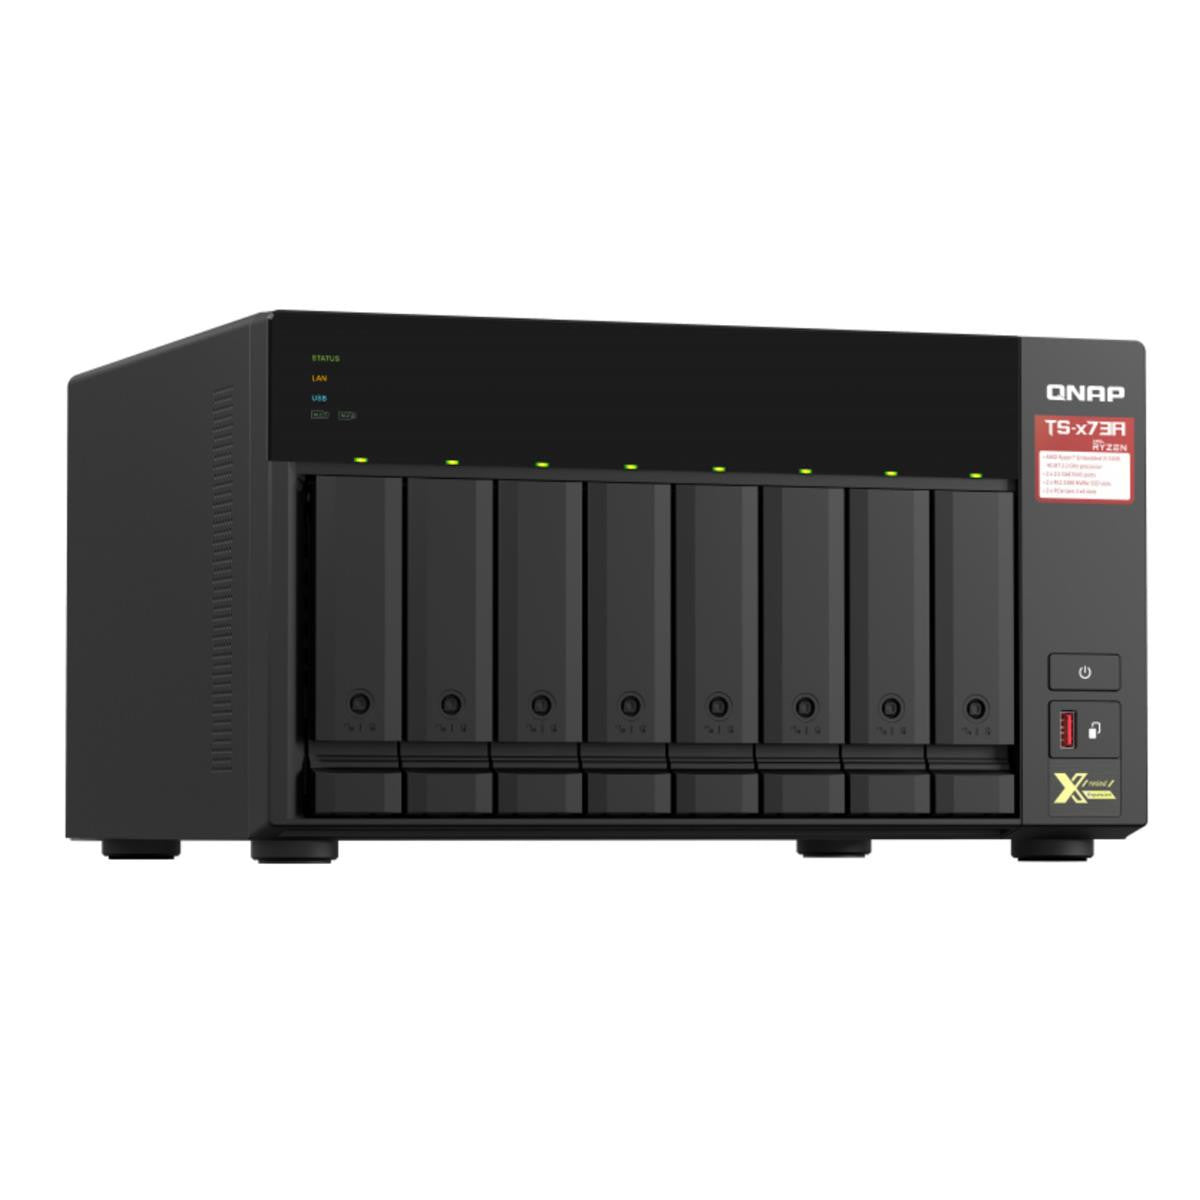 QNAP TS-873A 8-BAY NAS with 16GB DDR4 RAM and 24TB (8x3TB) Seagate Ironwolf NAS Drives Fully Assembled and Tested